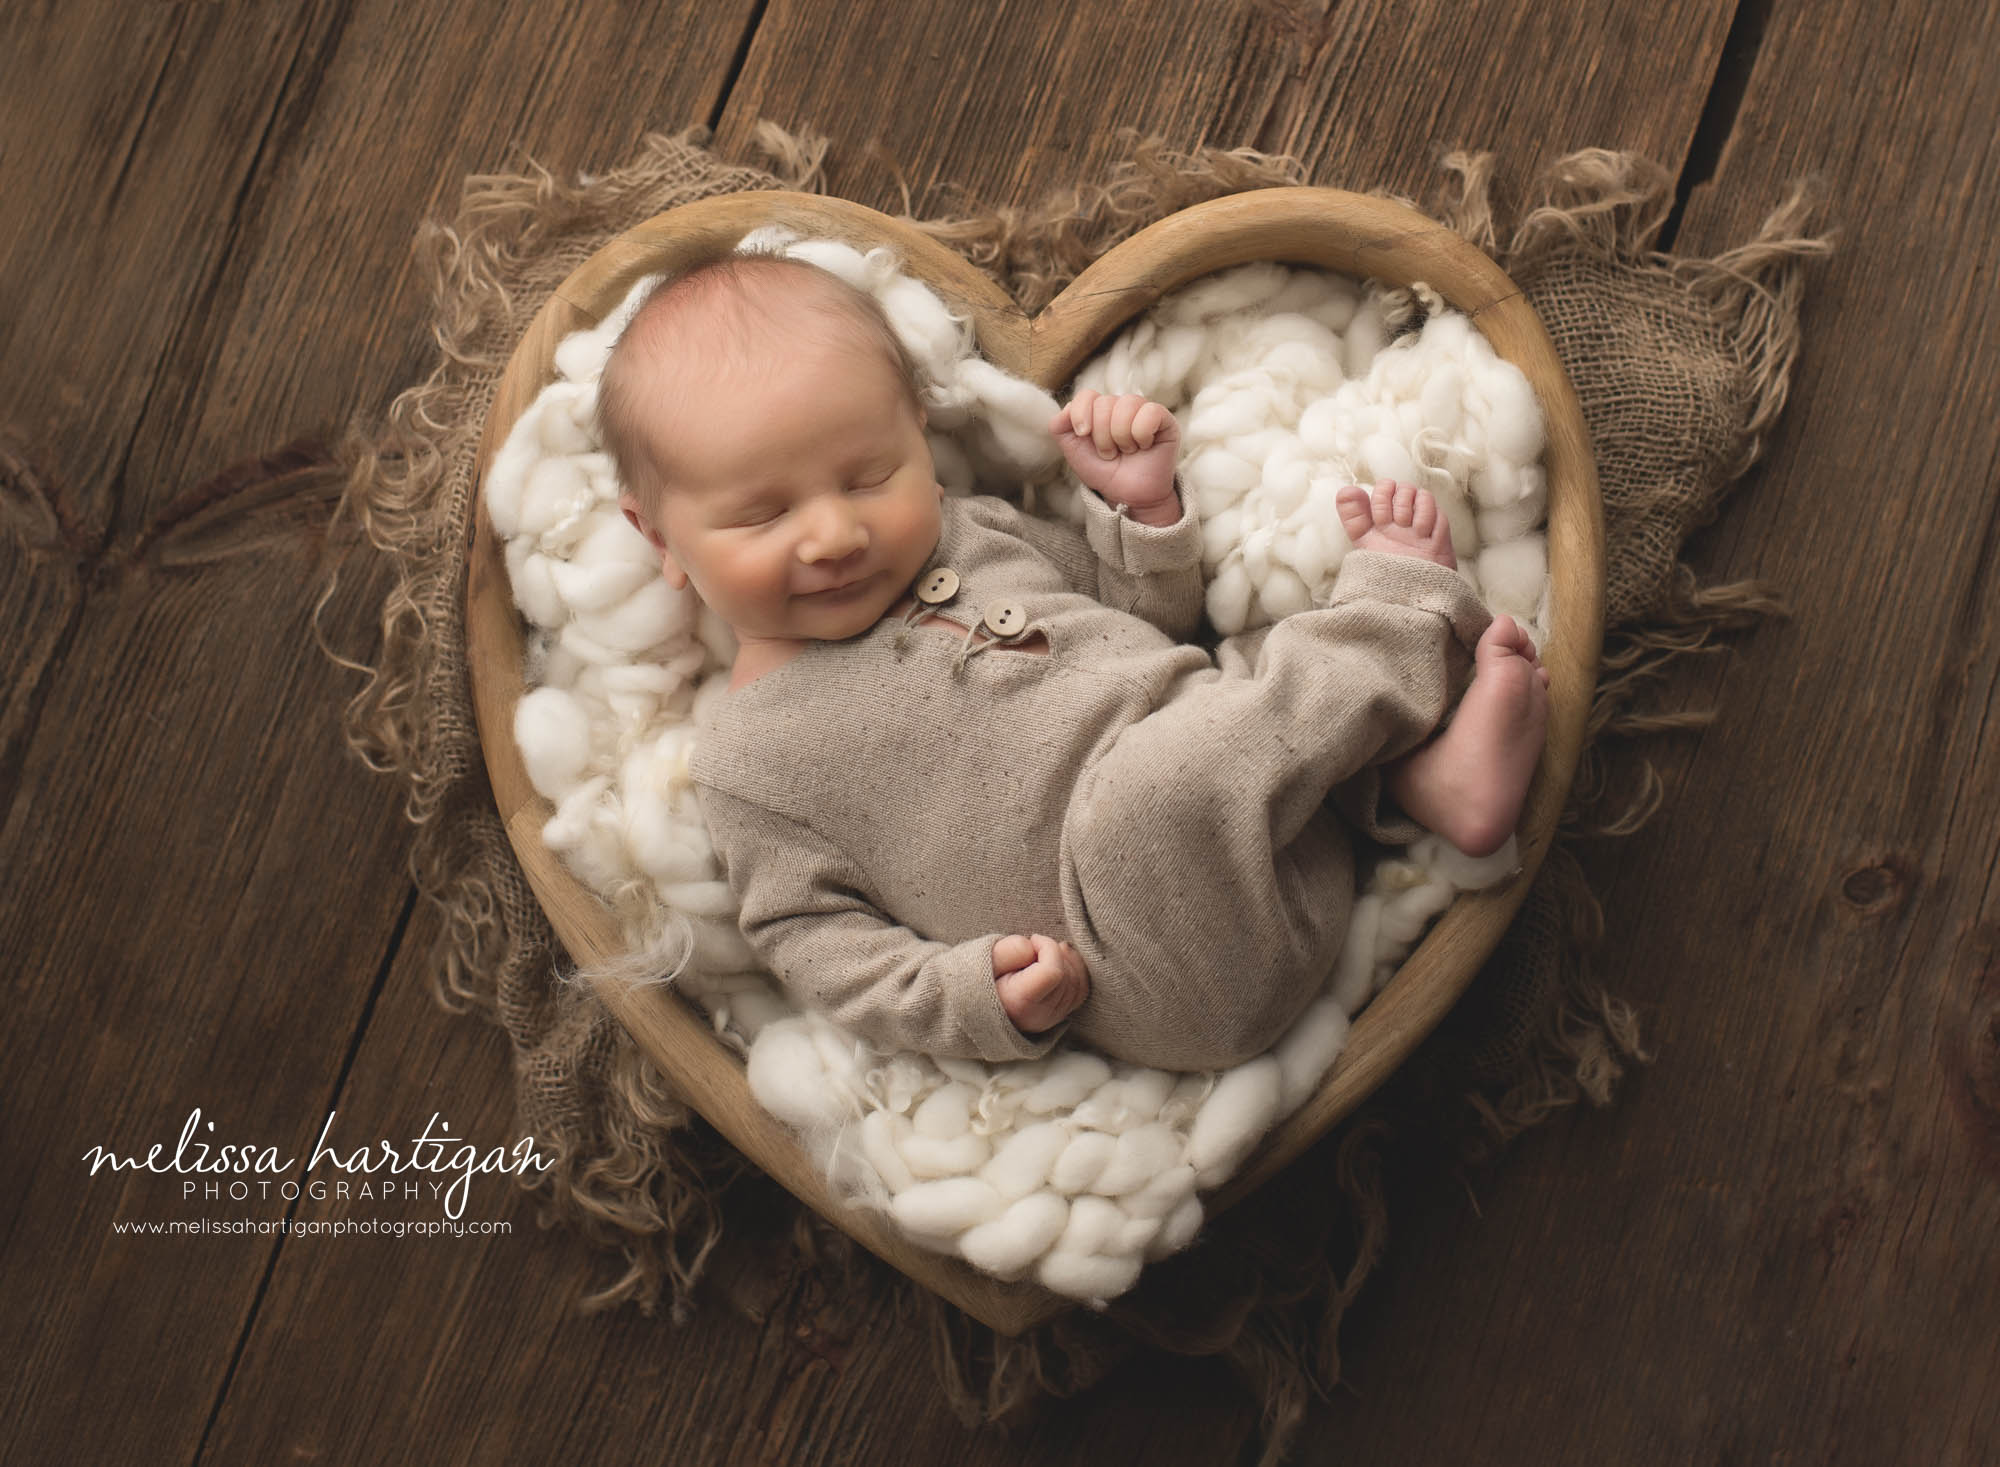 newborn baby boy posed in wooden heart shaped prop with cream fluffy layer and burlap layer under prop